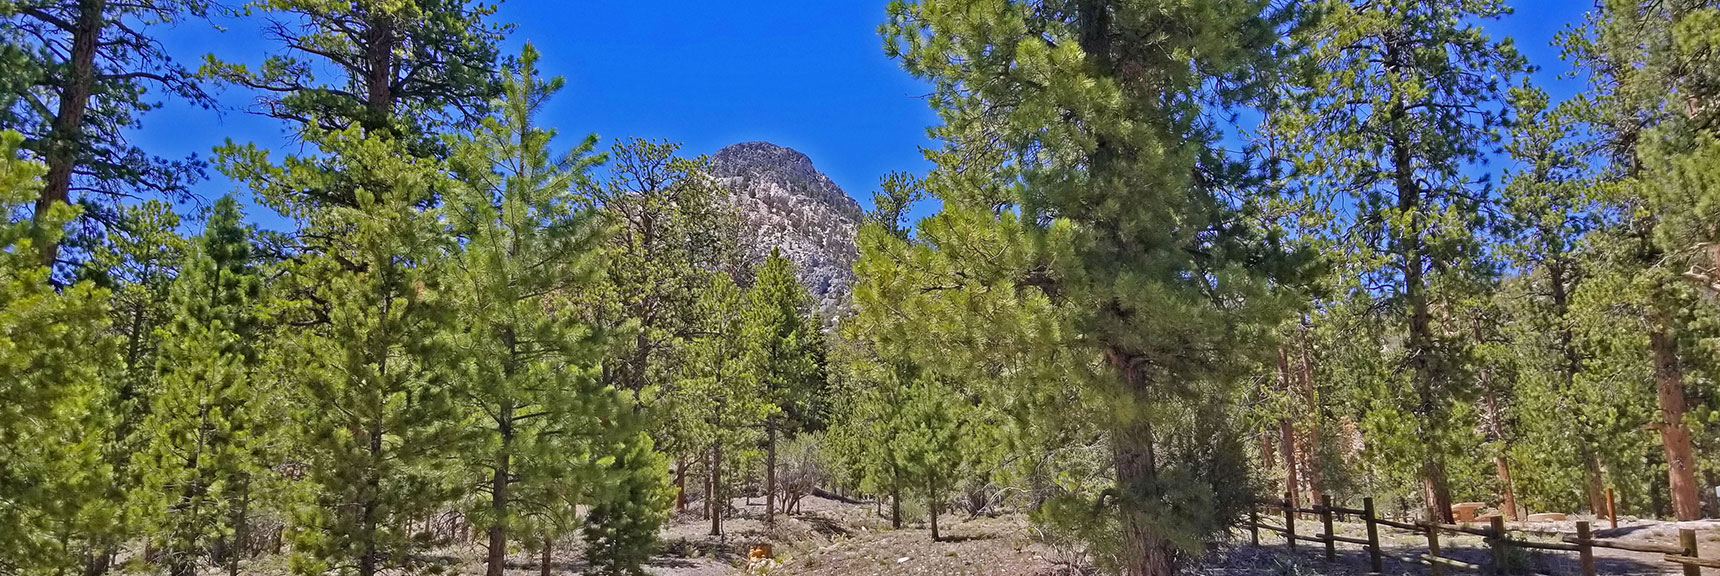 The Sisters South Viewed Through the Trees from the Old Mill Picnic Area Below | The Sisters South | Lee Canyon | Mt Charleston Wilderness | Spring Mountains, Nevada